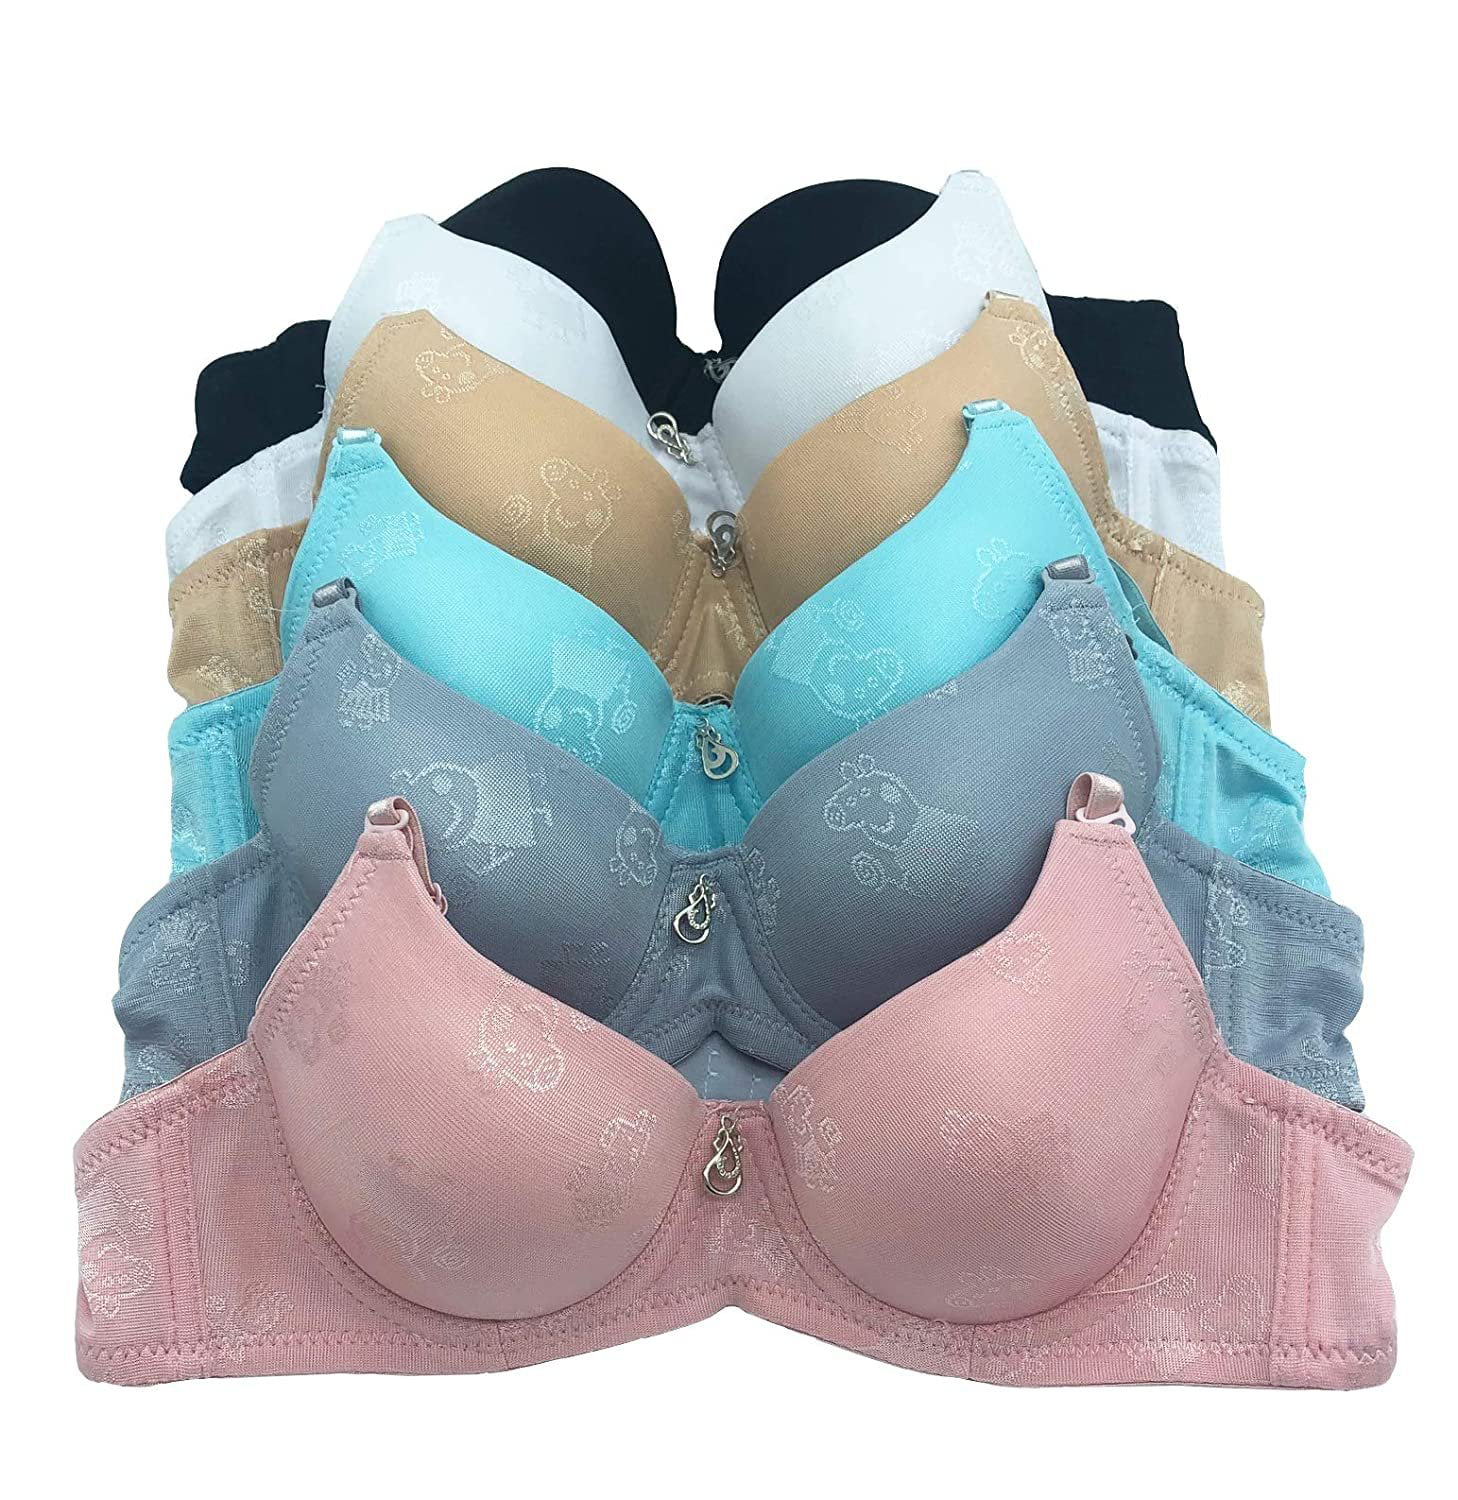 Iheyi 6 Packs Plain Lace Women Full Cup Gentle Push Up 30A 32A 34A